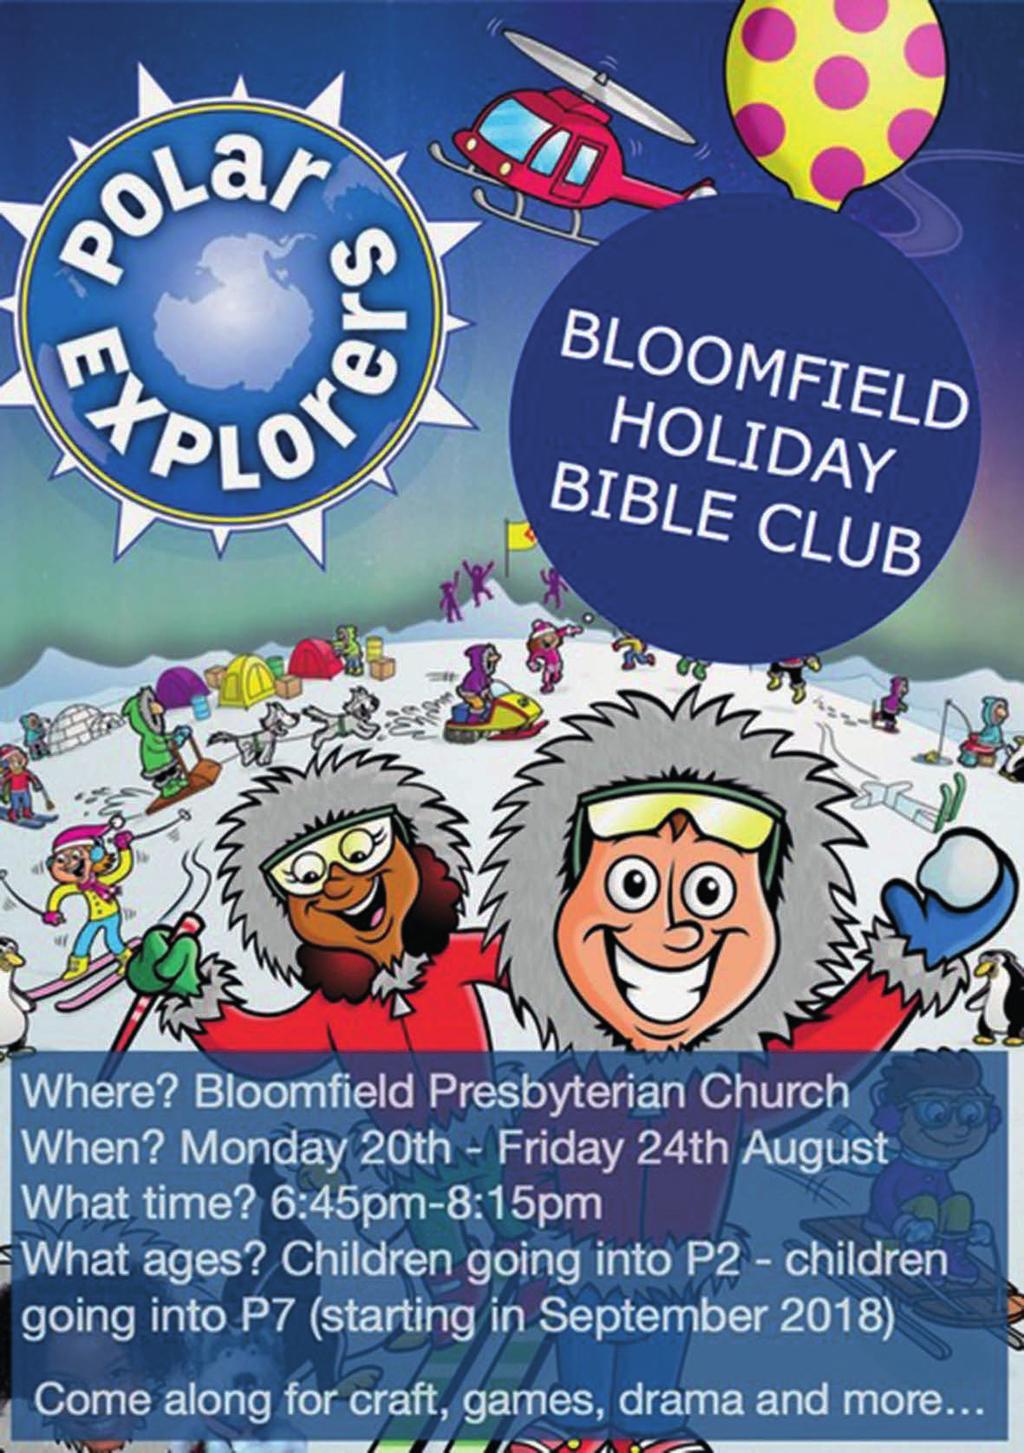 Holiday Bible Club Christianity Explored Starts Tuesday 18th September 2018 from 10am-11am.